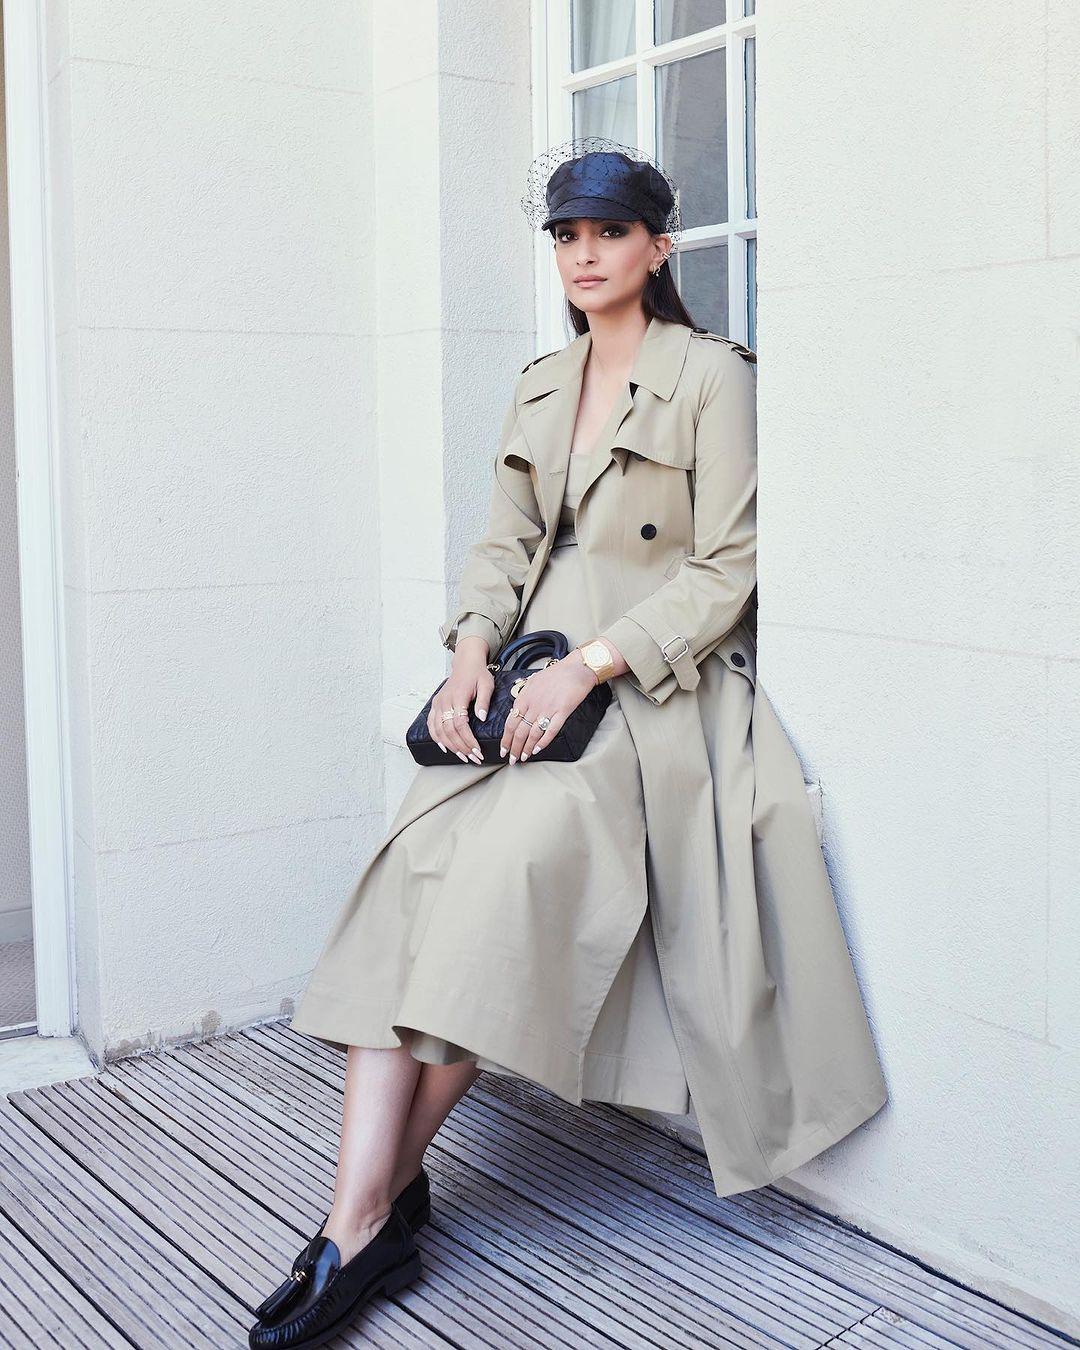 Sonam Kapoor donned this striking trench coat-inspired dress which immediately had netizens buzzing